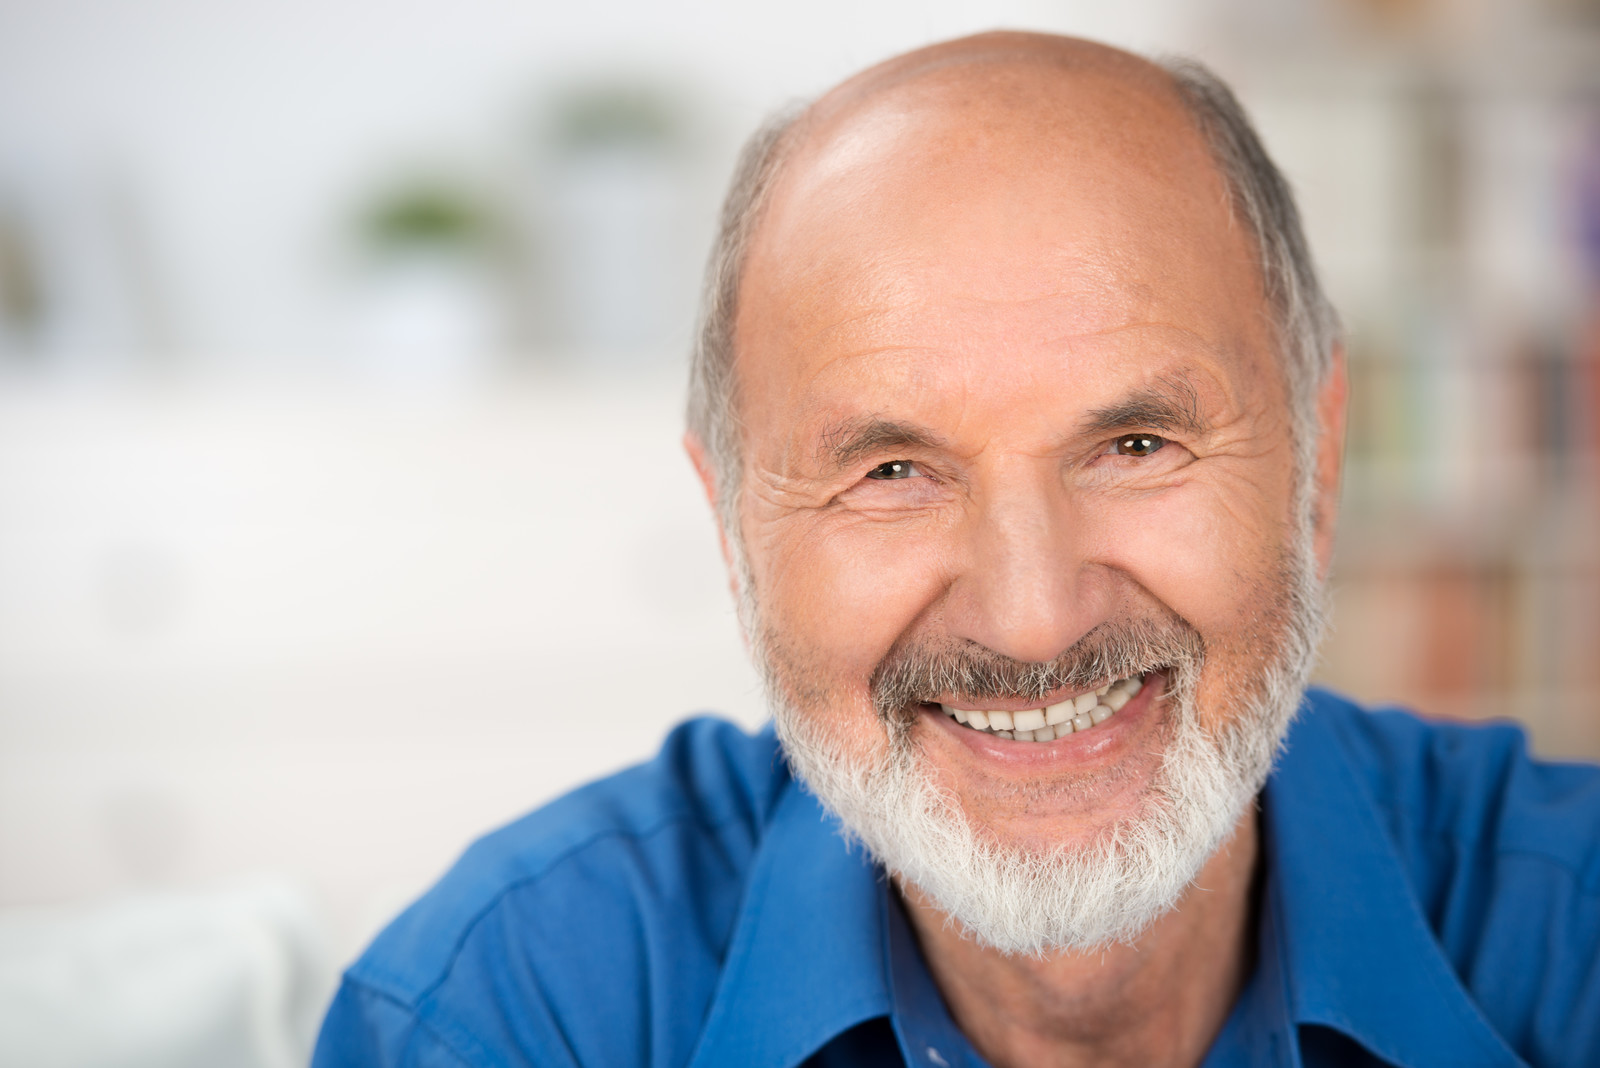 dentures vs dental implants choose the right fit for you